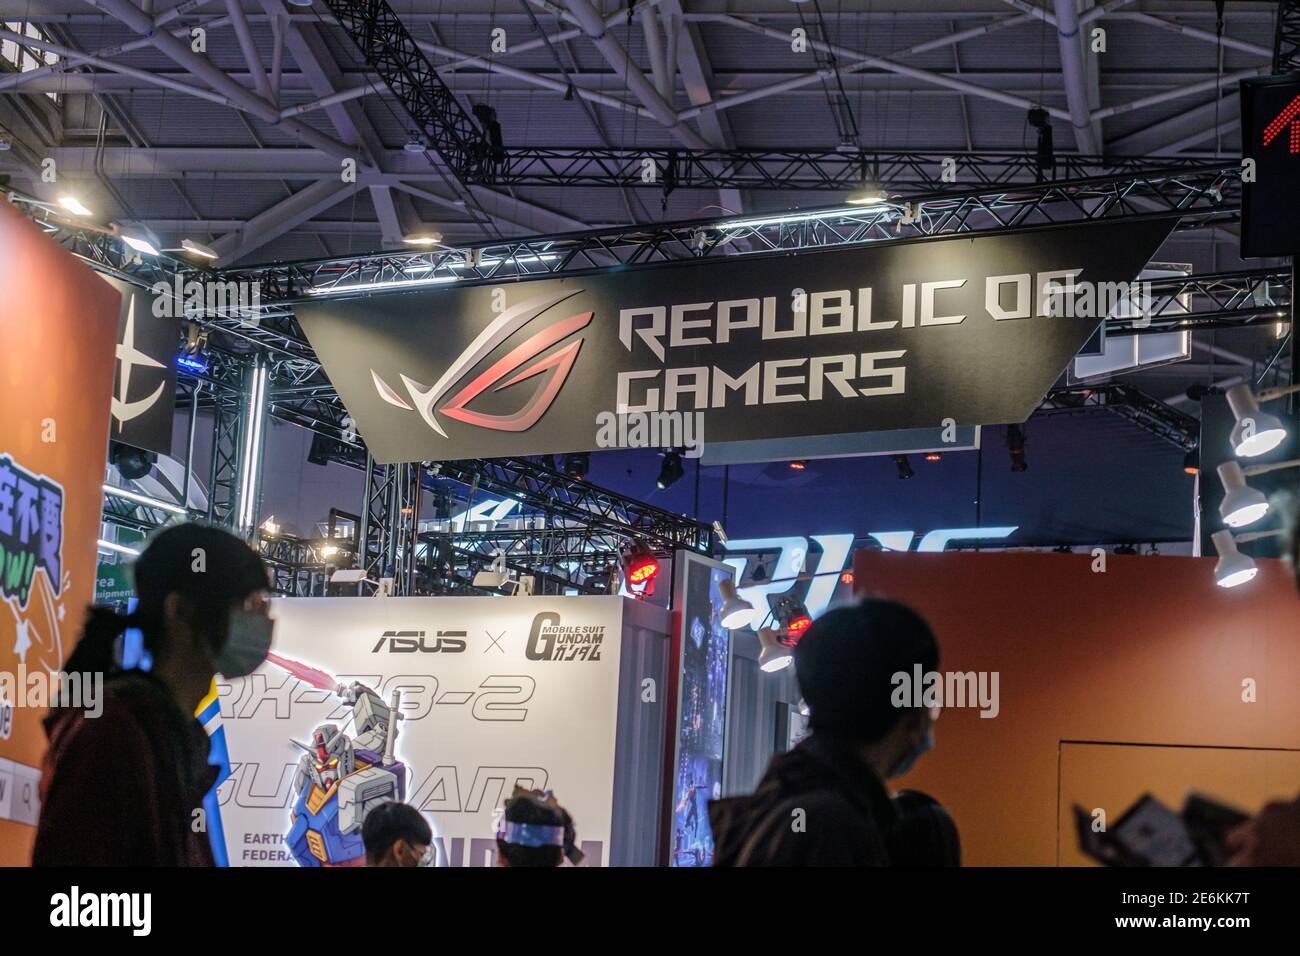 People pass by a ROG (Republic of Gamers) stand during the Taipei Game Show at Nangang Exhibition Center in Taipei.Taipei Game Show, held by Taipei Computer Association (TCA), is the only game exhibition, which combines B2B and B2C zone. From 2003, it attracts tons of gamers from all over the world because of the special and amazing content. B2B ZONE divides into “B2B ZONE” and “Indie House”. The former one focuses on game developers, publishers, third-party payment and advertisers, the latter one gathers global indie teams to share and merchandise their game IPs. Also, B2B ZONE set up an onli Stock Photo